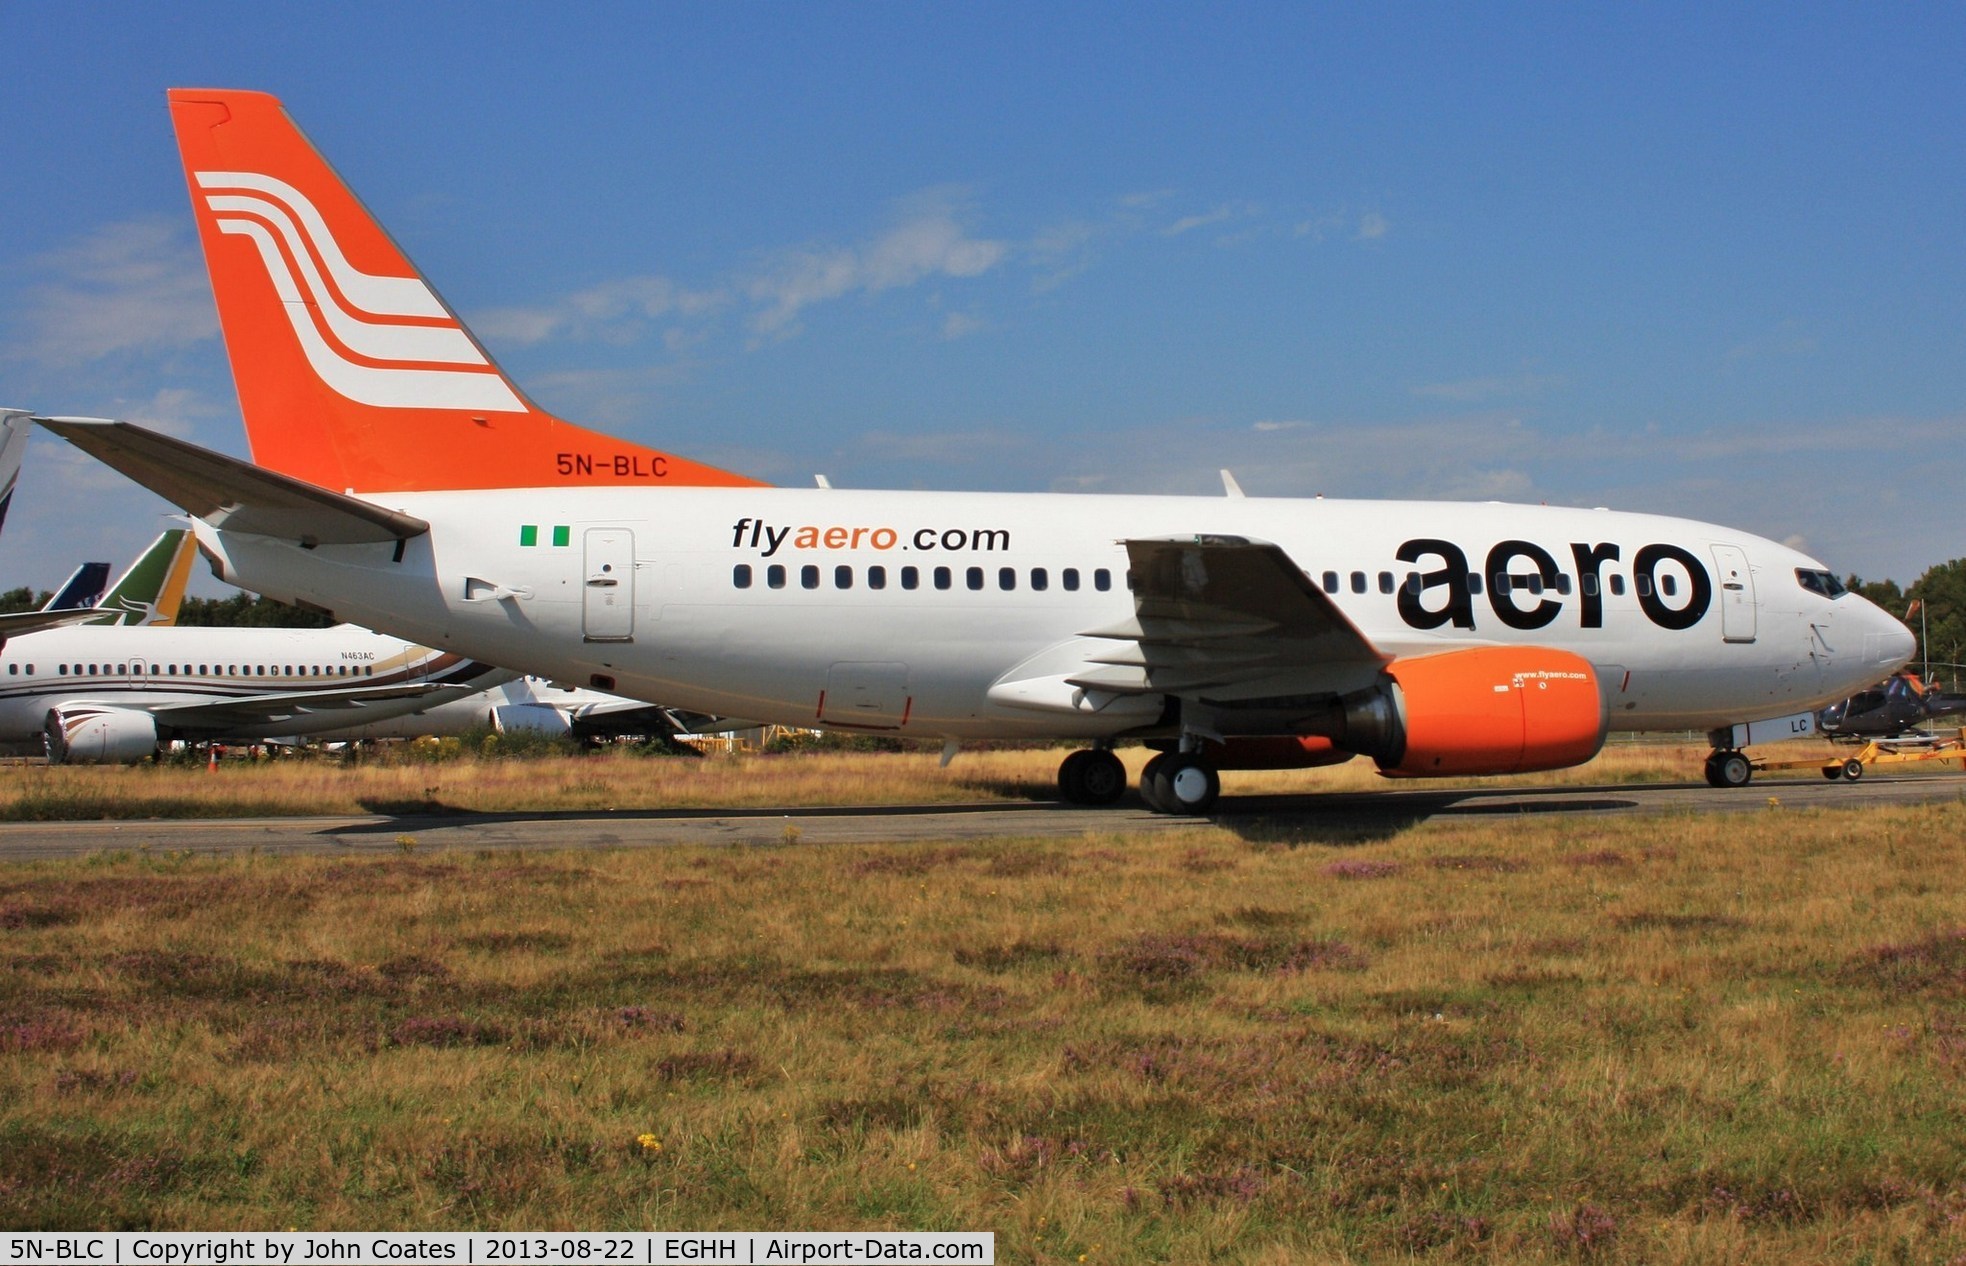 5N-BLC, 1993 Boeing 737-522 C/N 26692, Taxiing to depart after paint into latest livery.